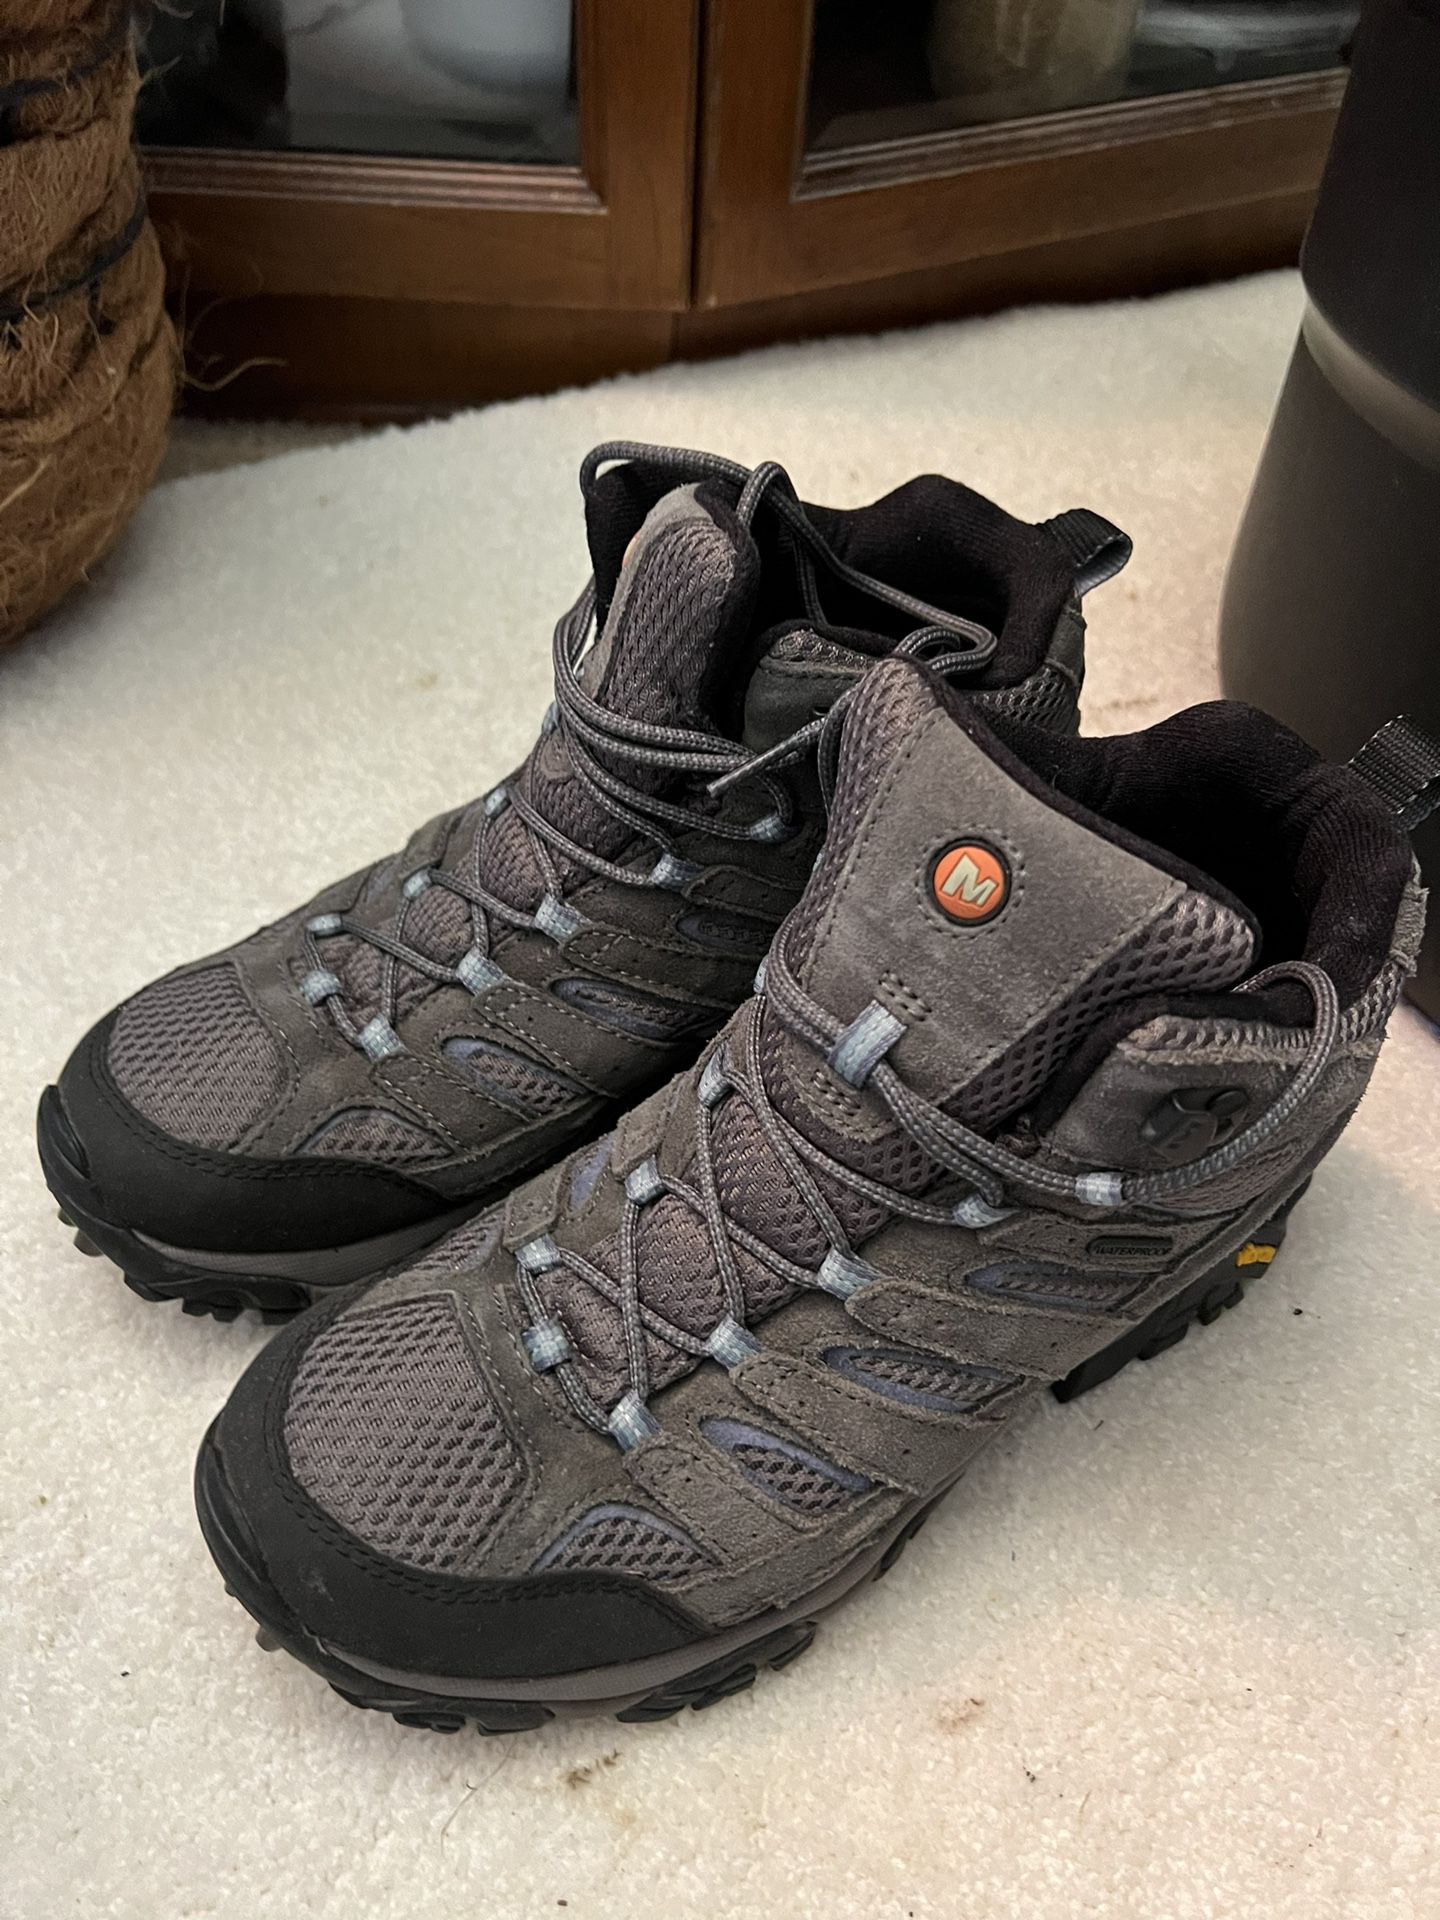 Merrell Hiking Boots Size 8